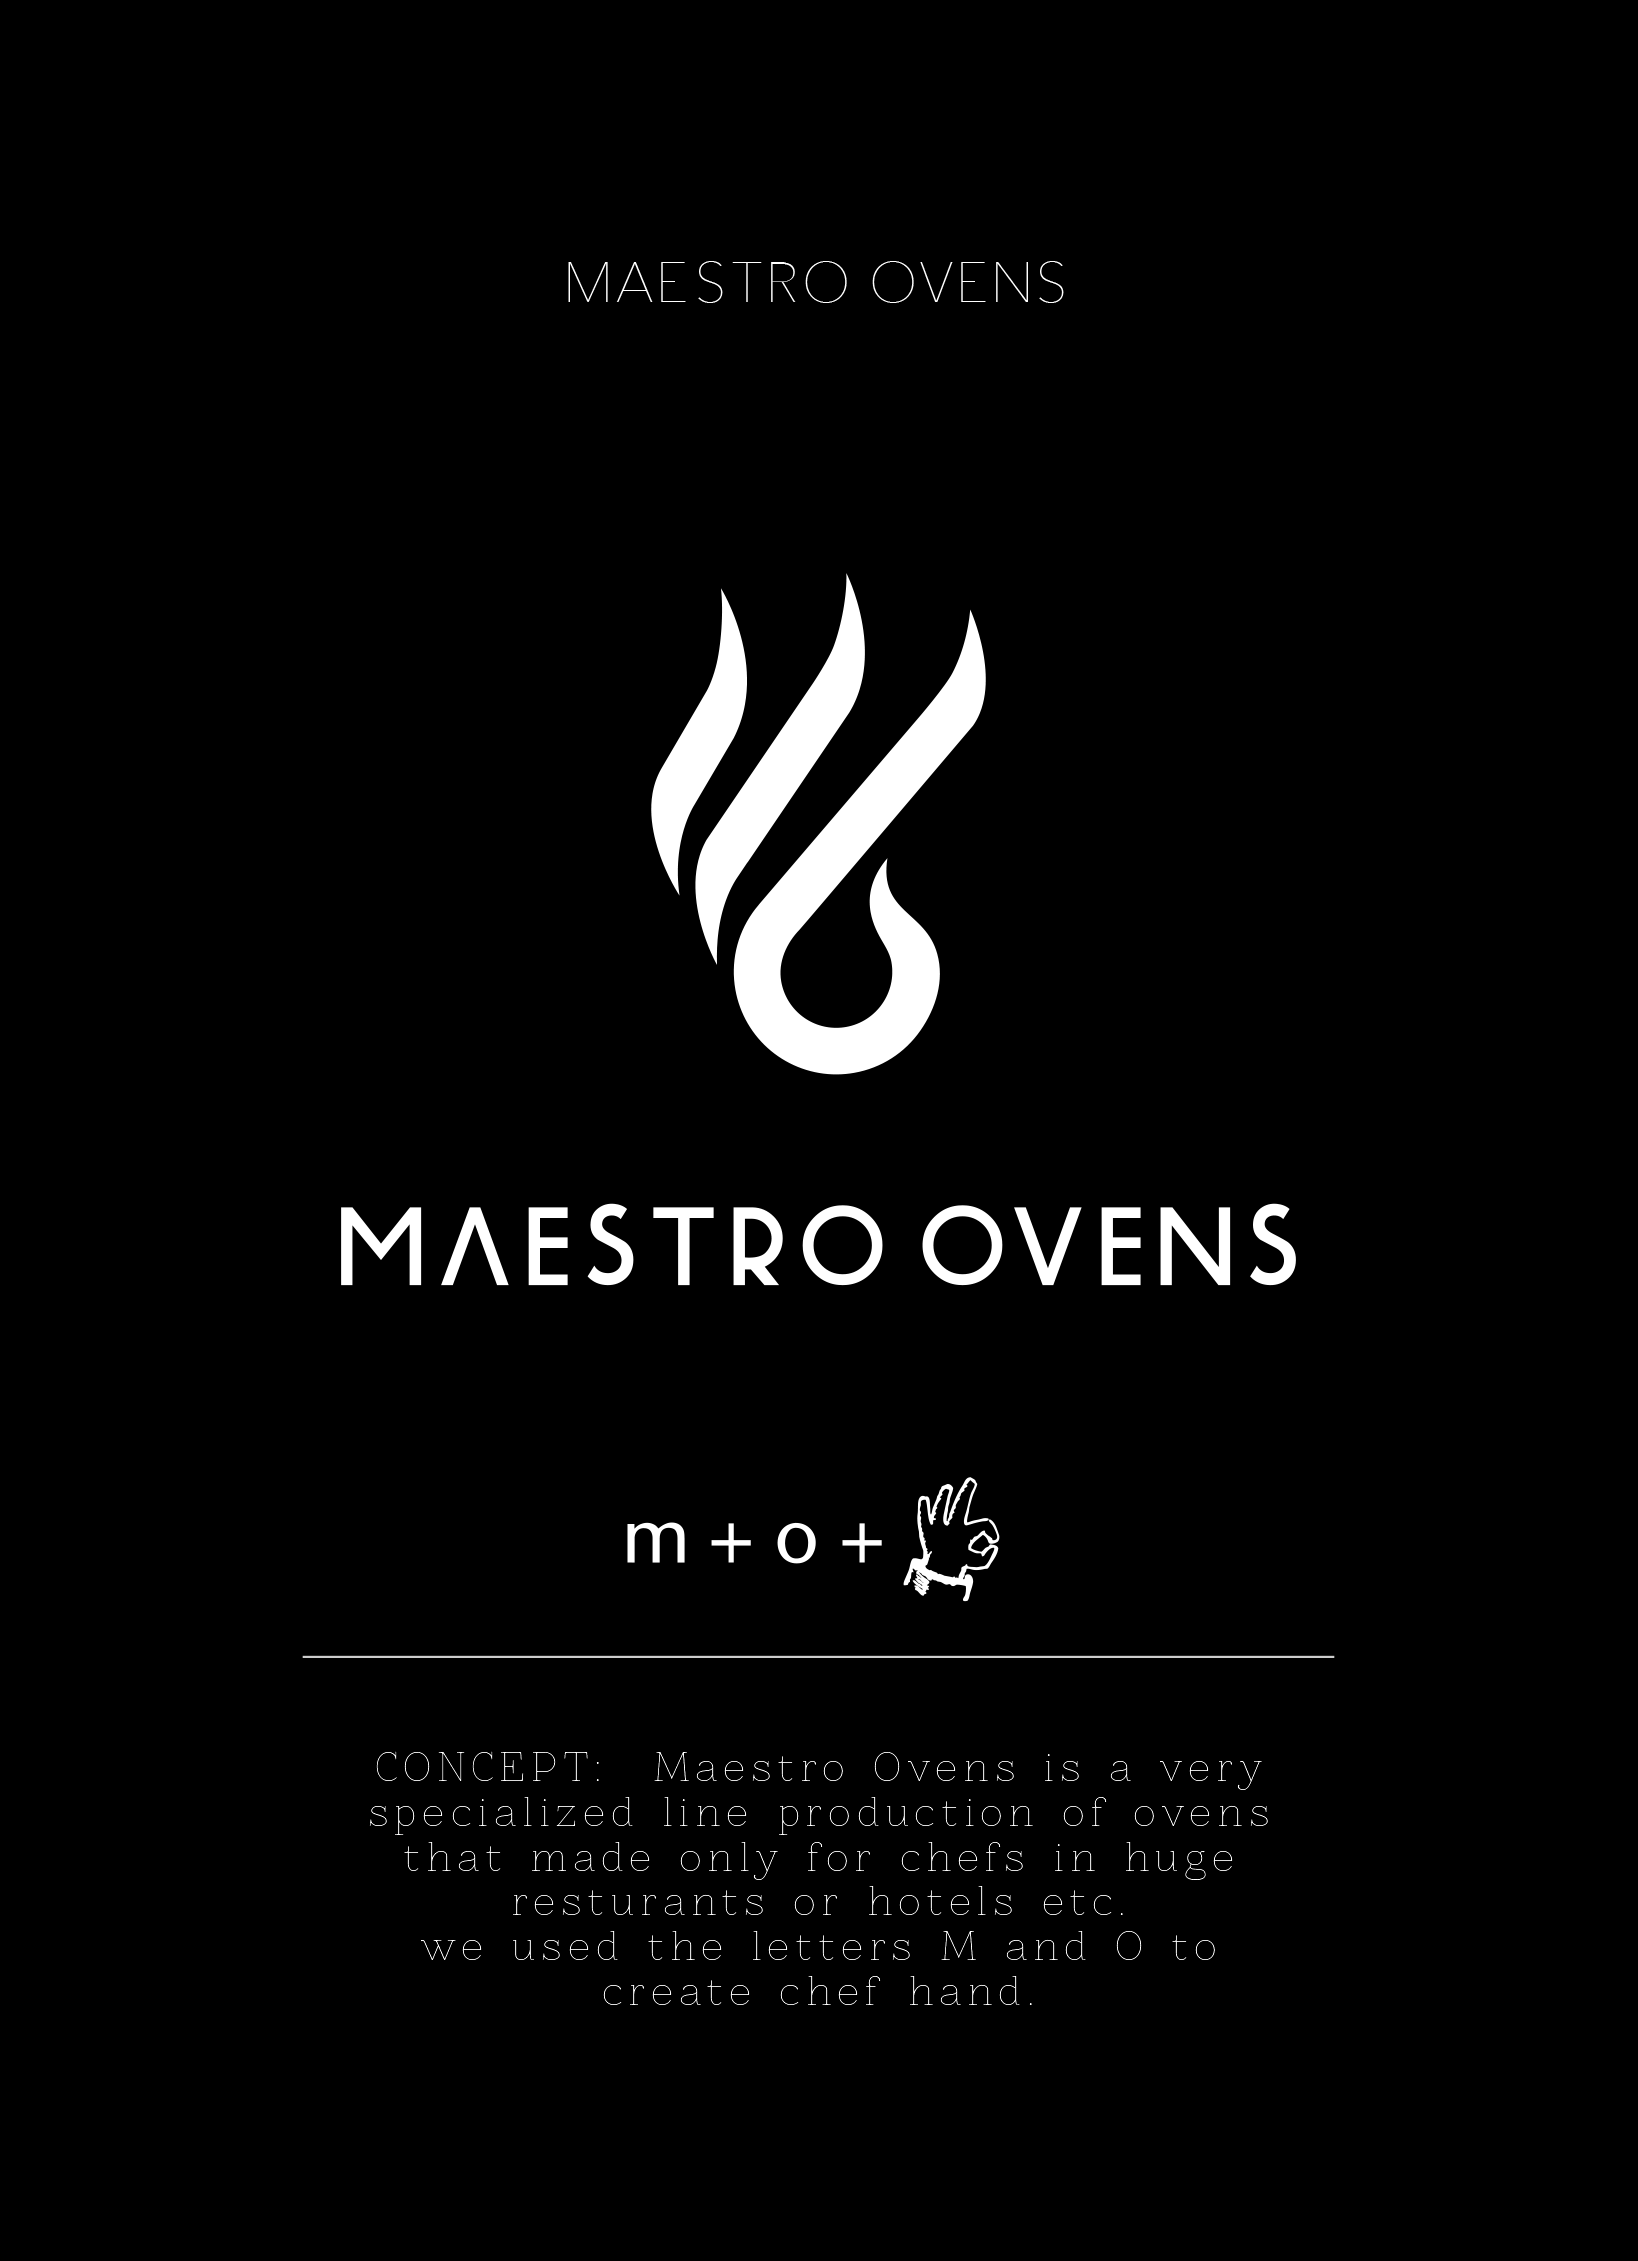 Huge O Logo - MAESTRO OVENS CONCEPT: Maestro Ovens is a very specialized line